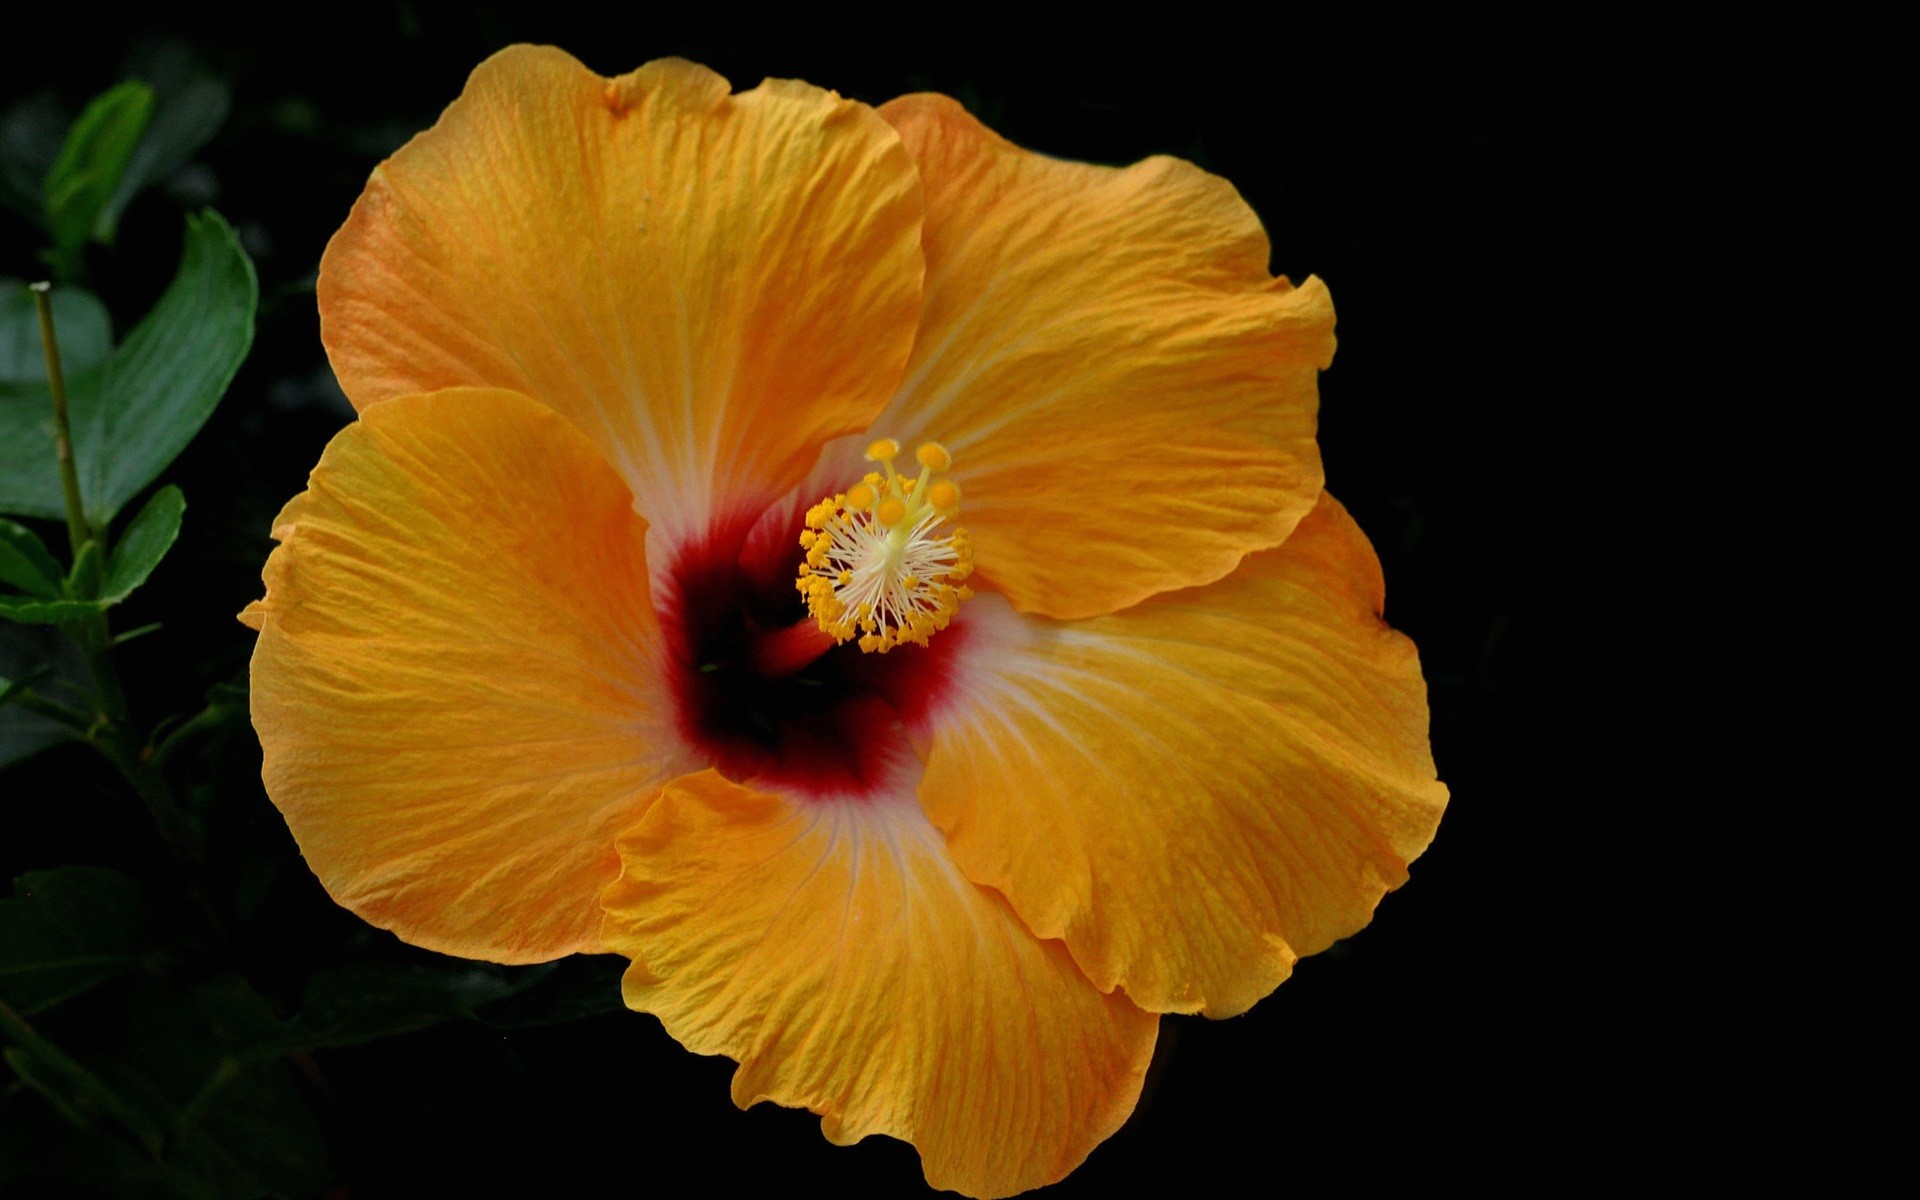 Yellow Hibiscus Flower On A Black Background - Hd Hibiscus Flowers With Black Background - HD Wallpaper 